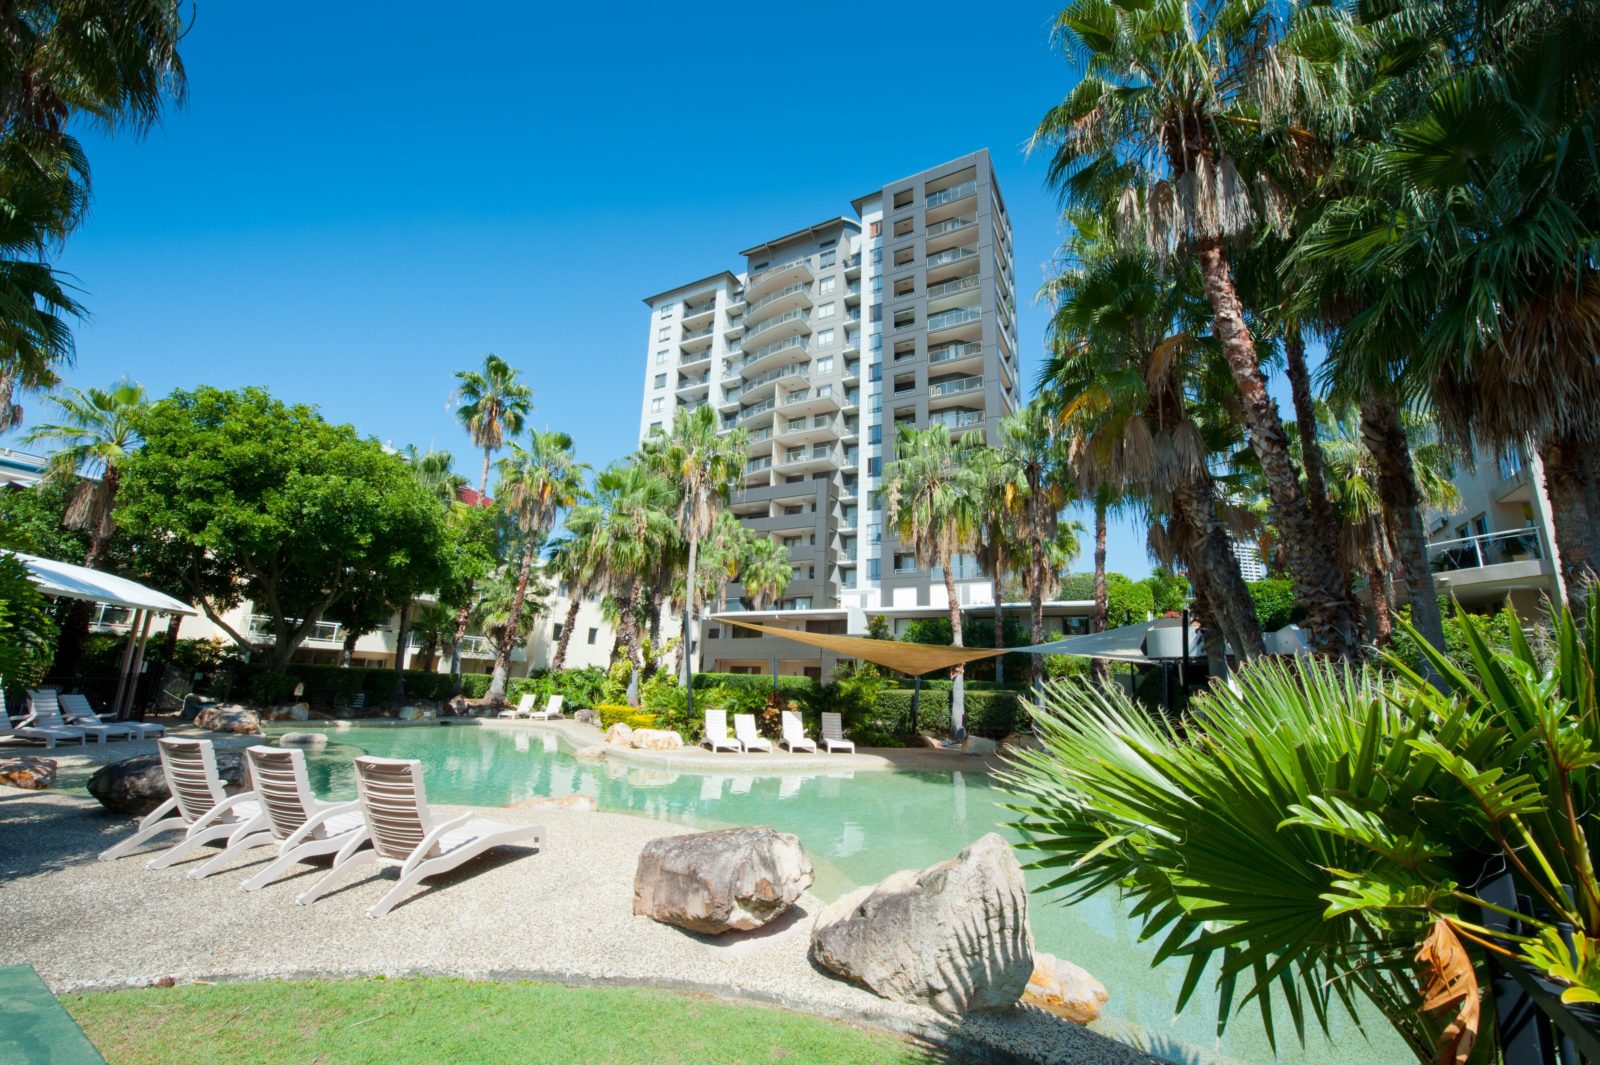 View of lagoon style pool with apartment building behind.